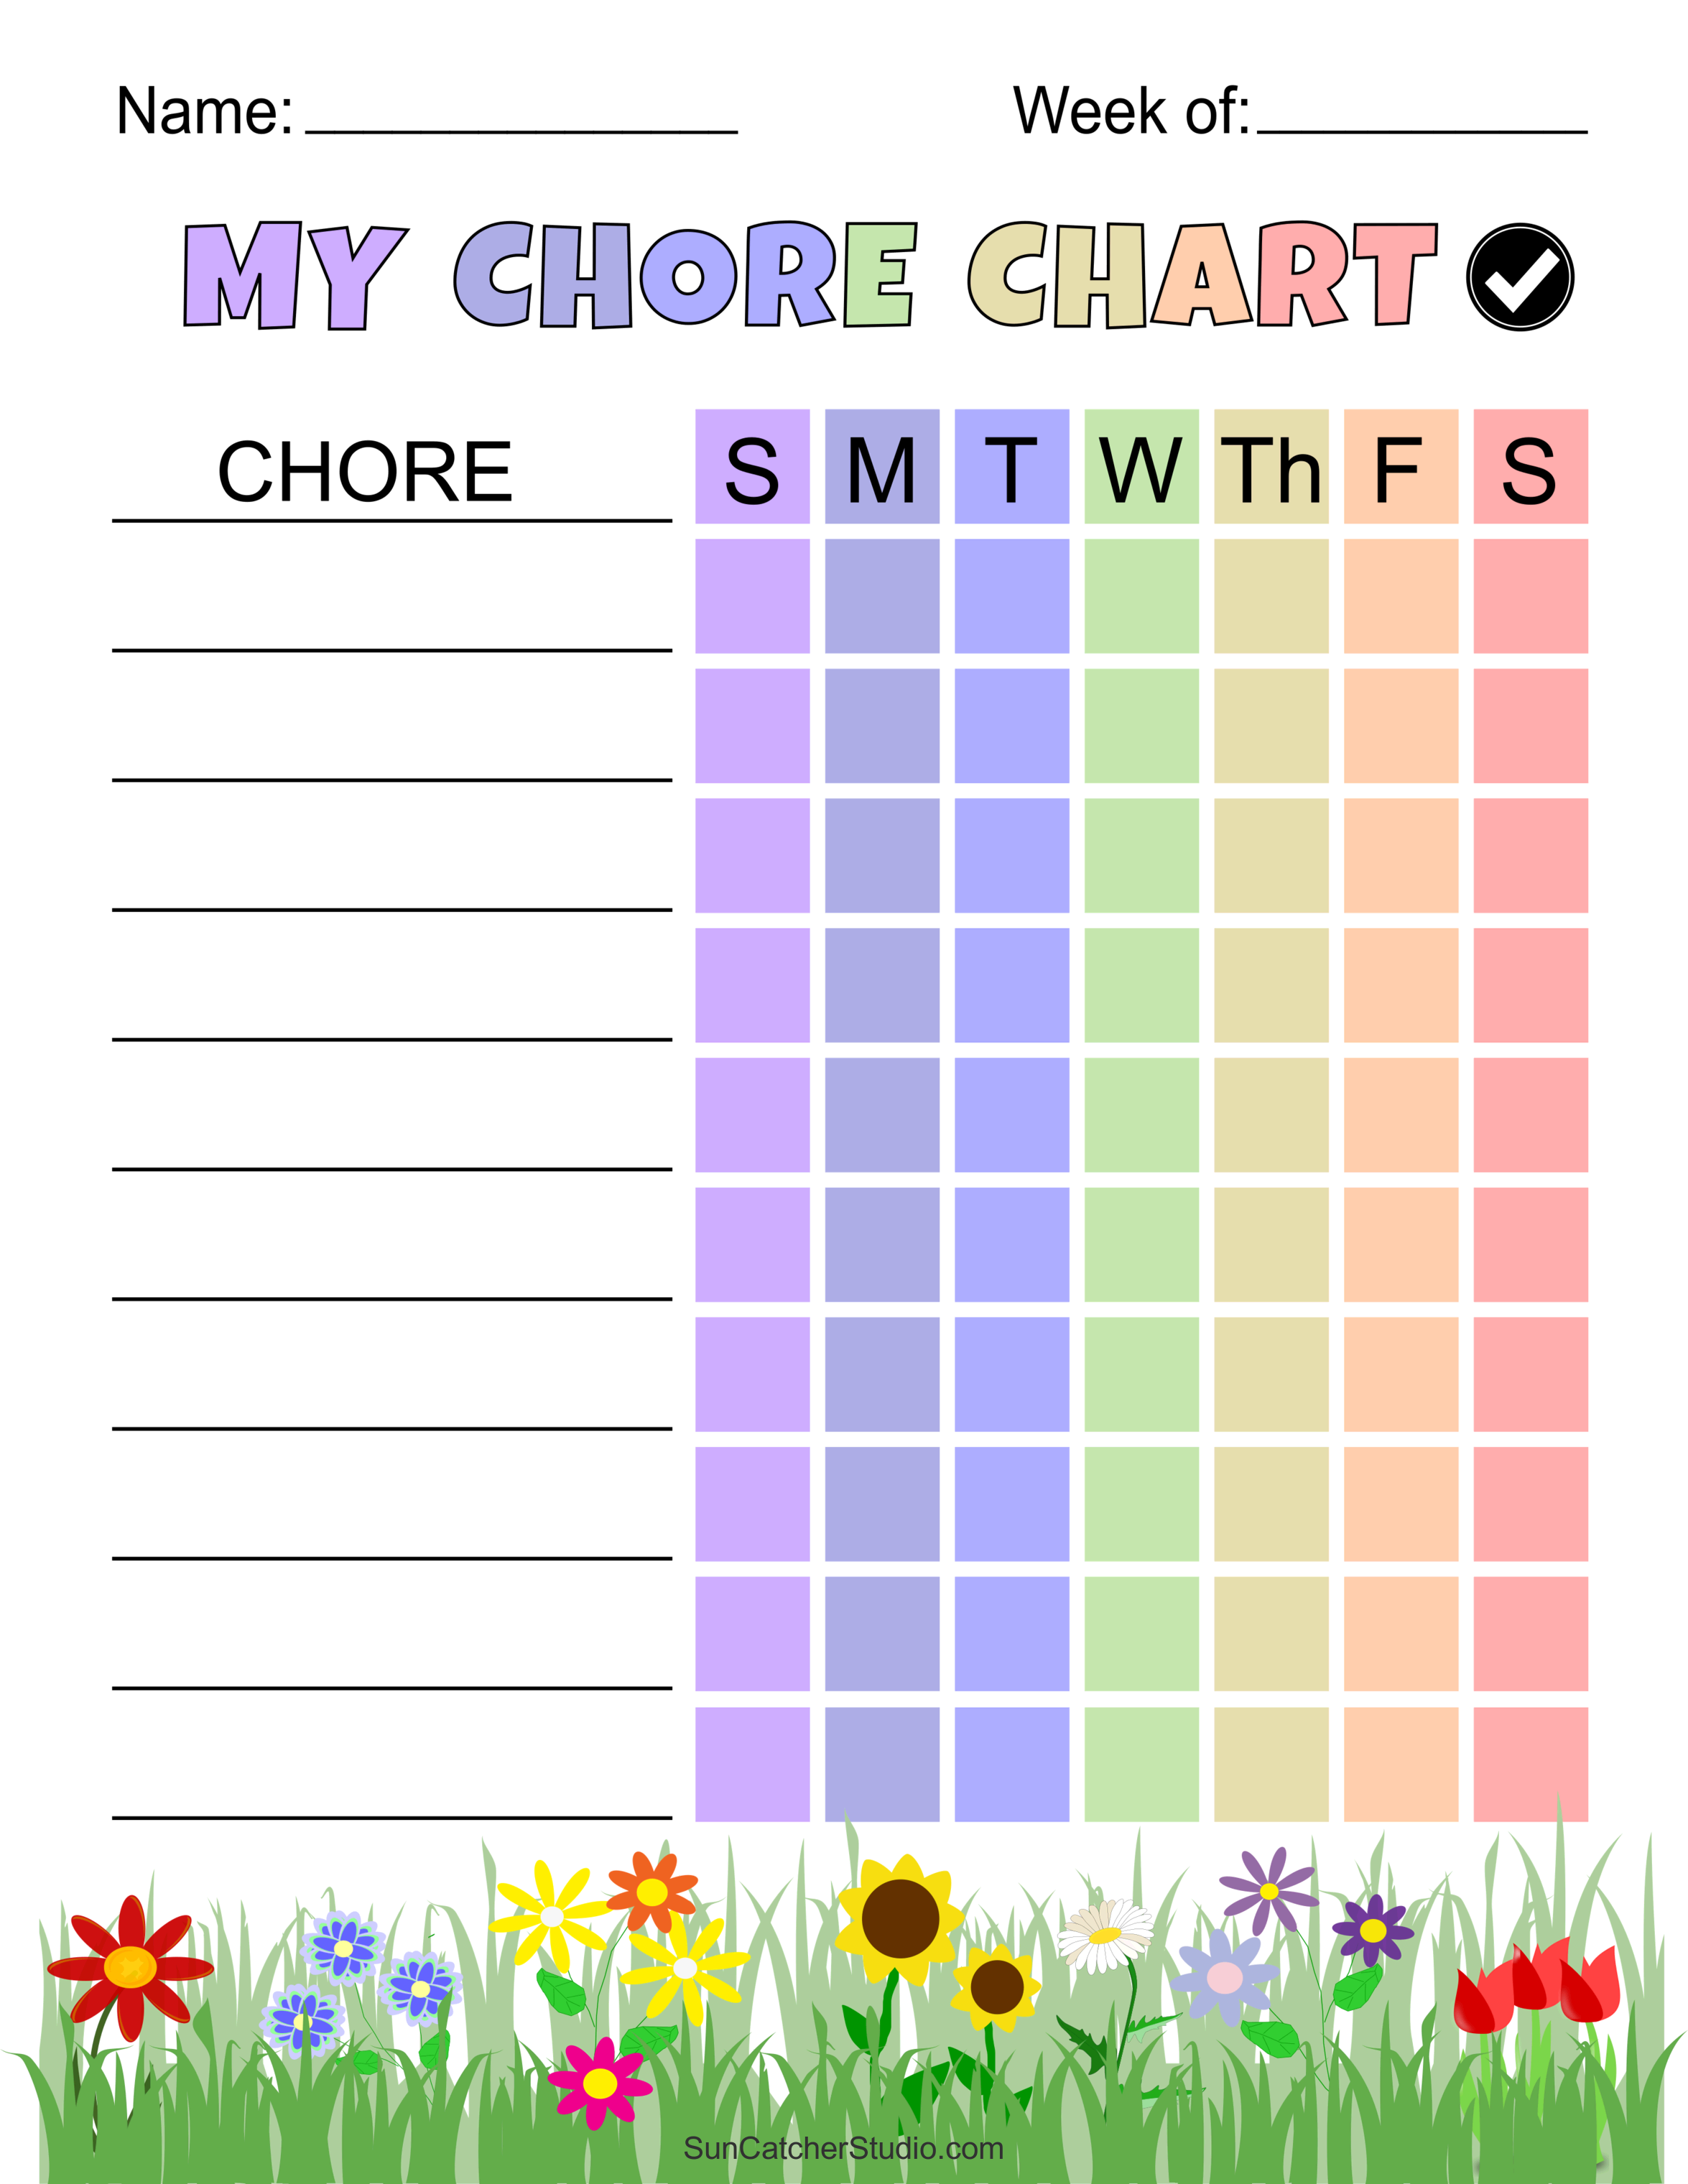 weekly-chore-checklist-template